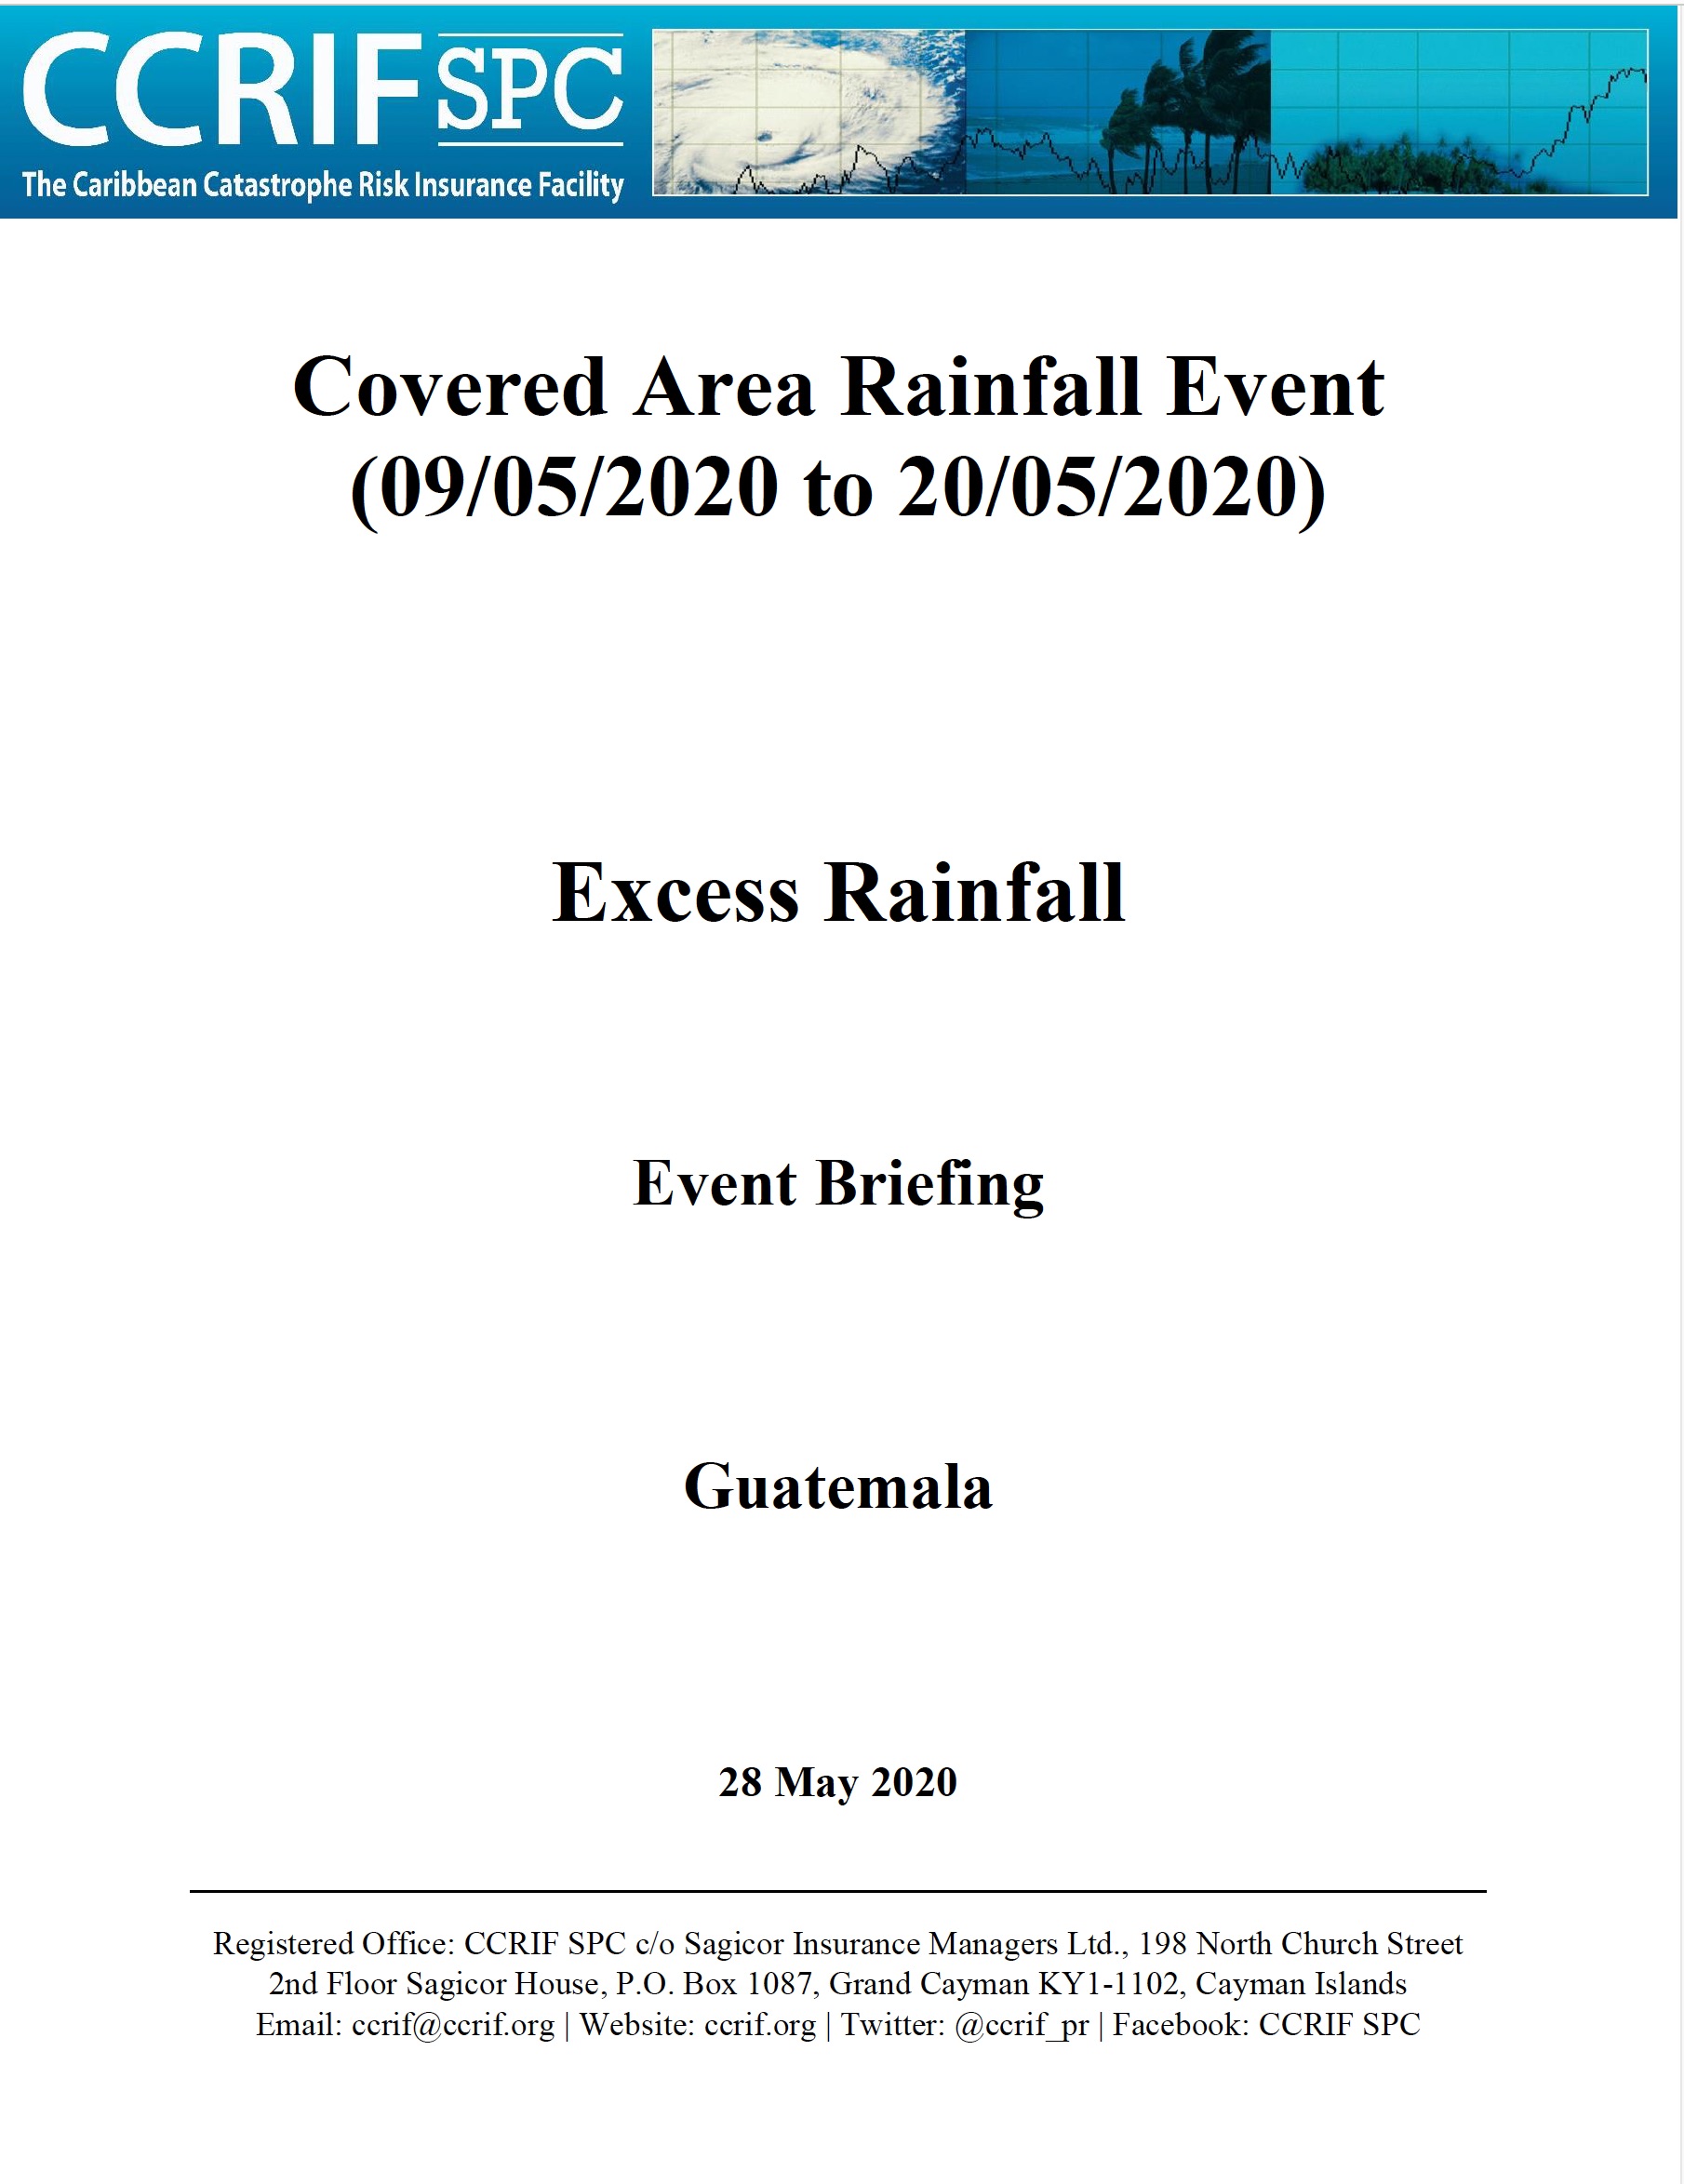 Event Briefing - Excess Rainfall - Covered Area Rainfall Event - Guatemala - May 28 2020